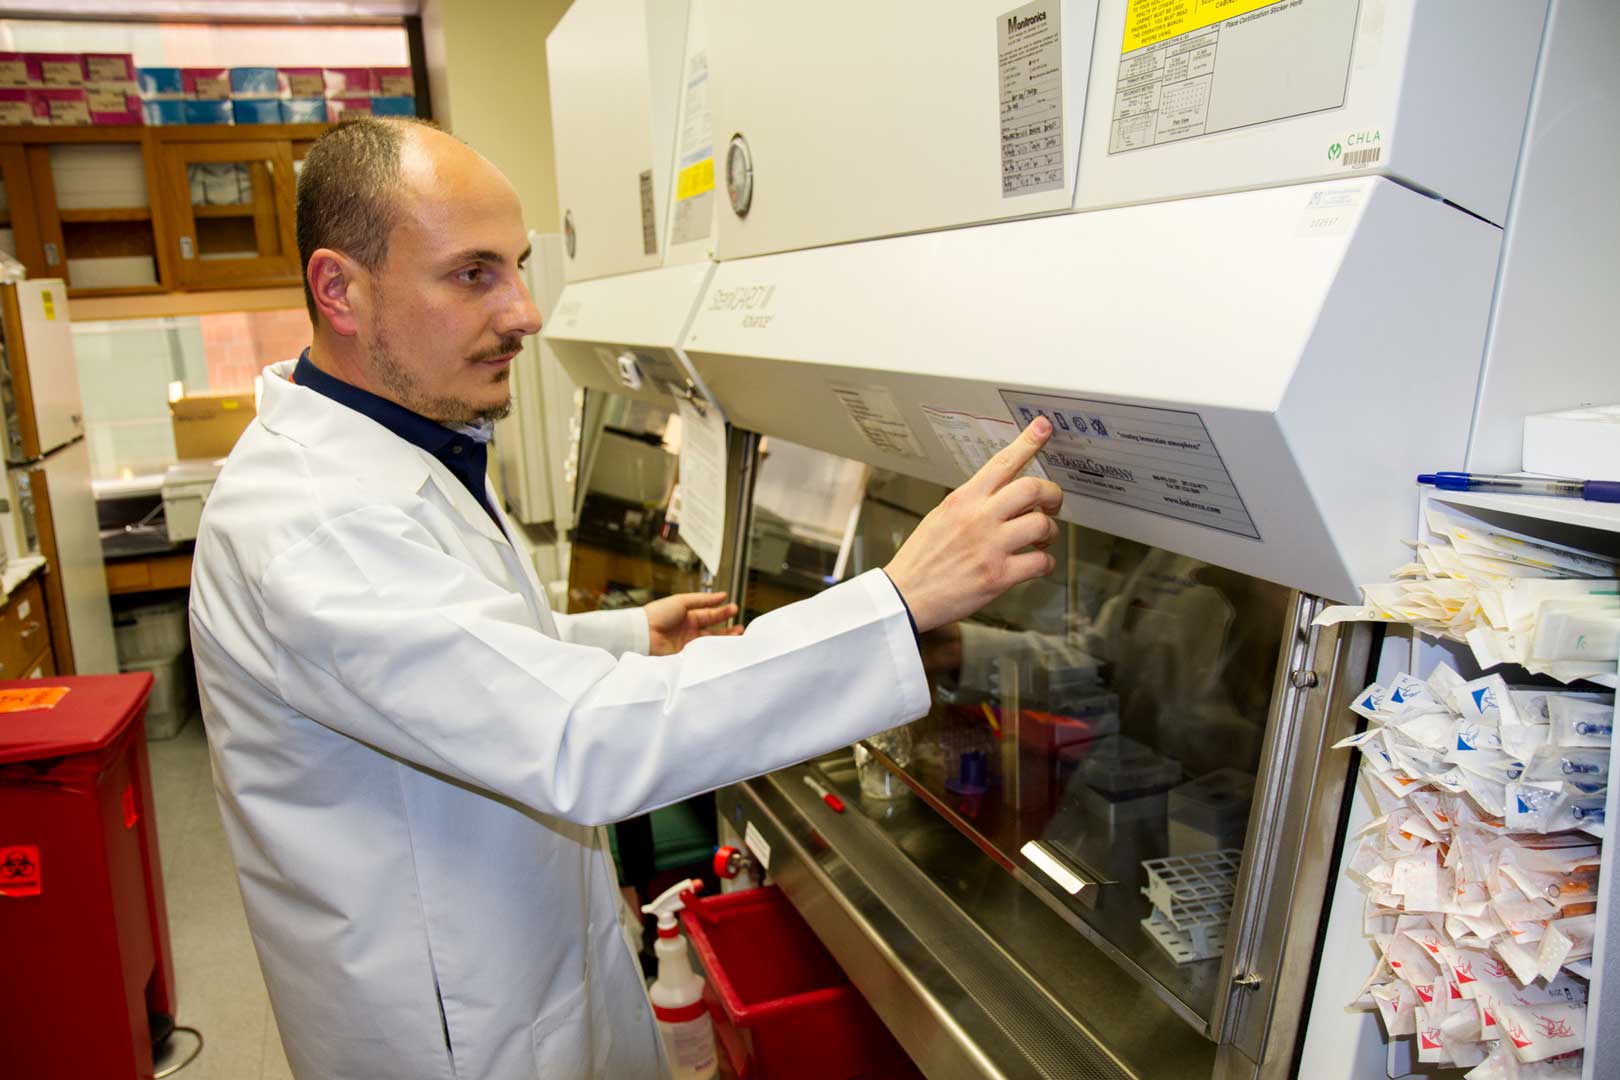 Dr. Fabbri presses buttons on a hood in his lab